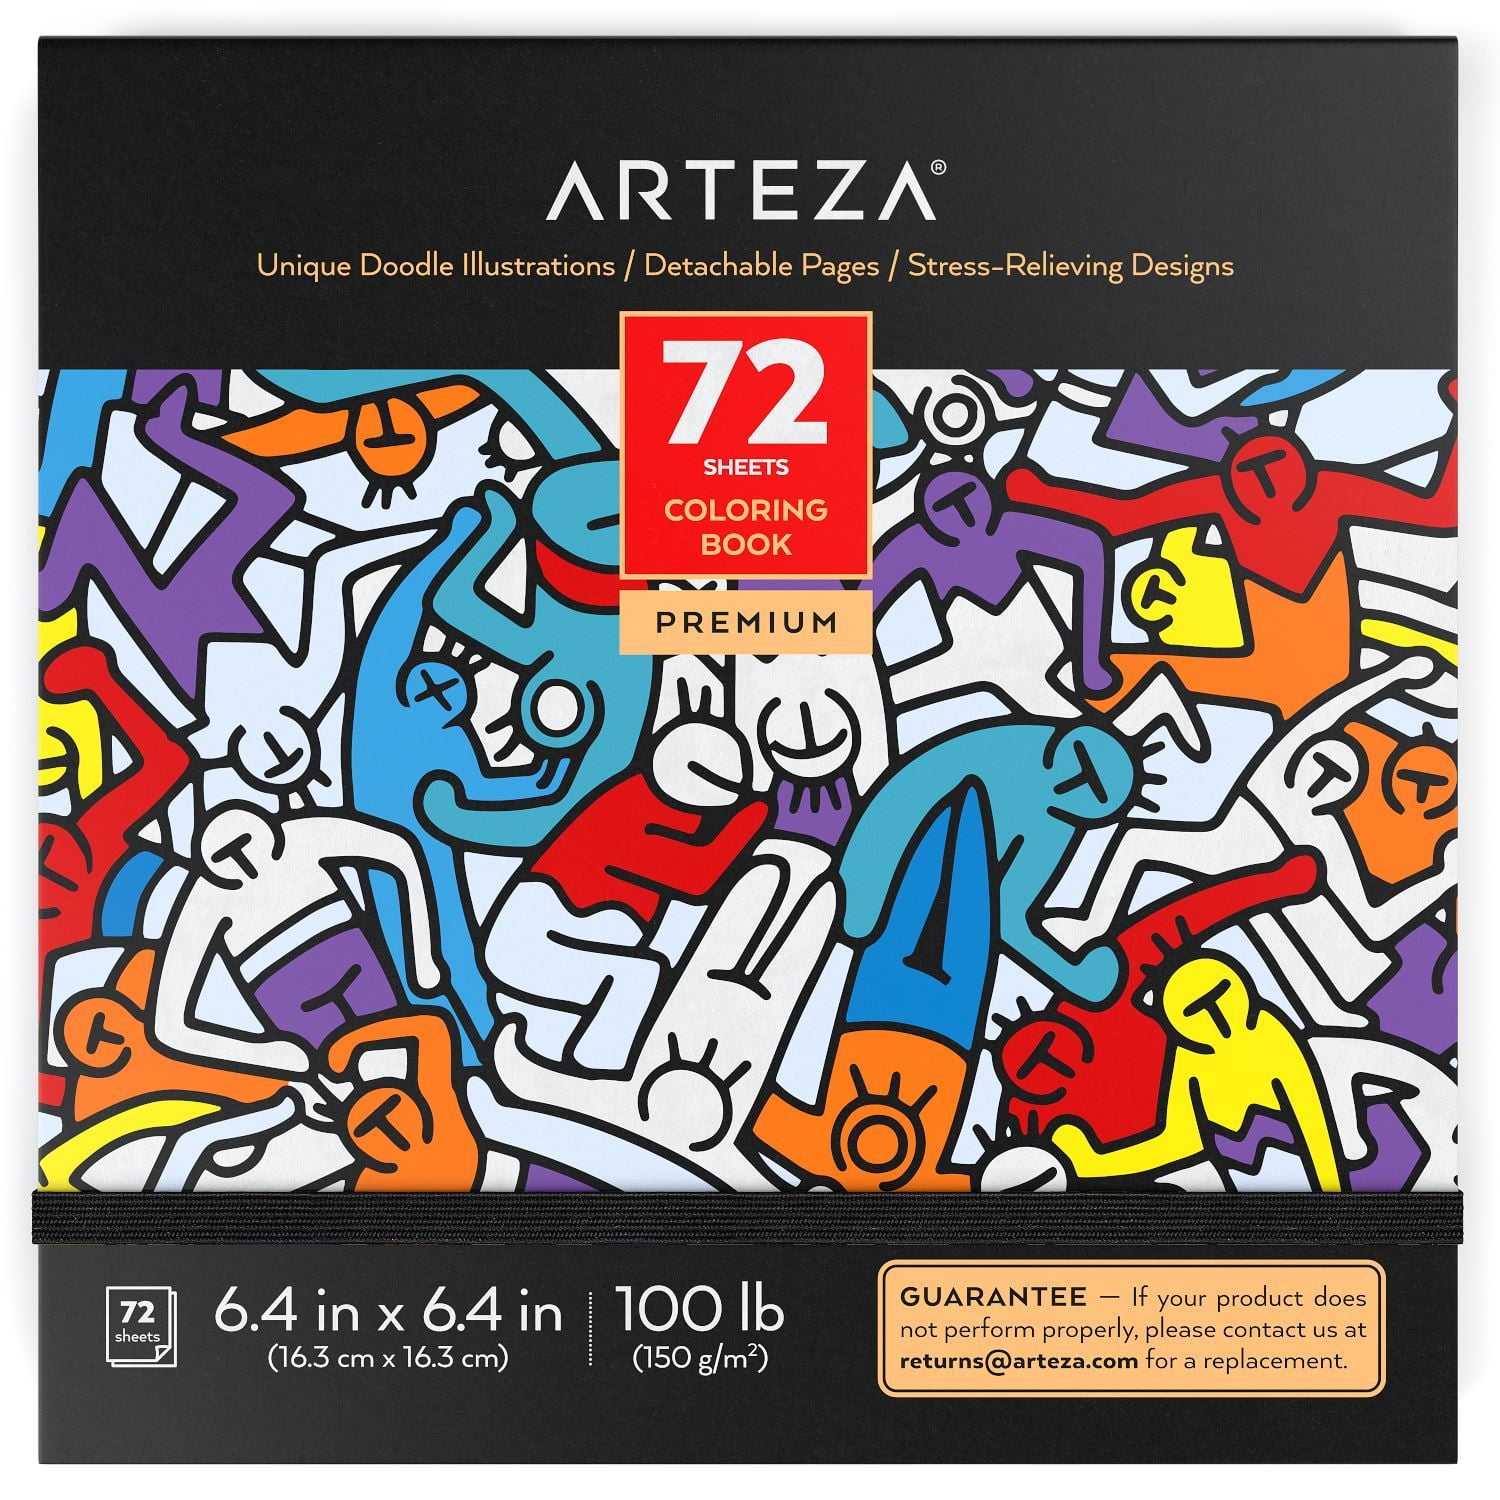 Art Supplies for Relaxing and Crafting 12.1 x 13.5 Inches 215-lb Paper 30 Sheets Ocean Illustrations Arteza Adult Coloring Book DIY Coloring Sheets Fold Into 8 x 8 Inches Frames Reflecting 